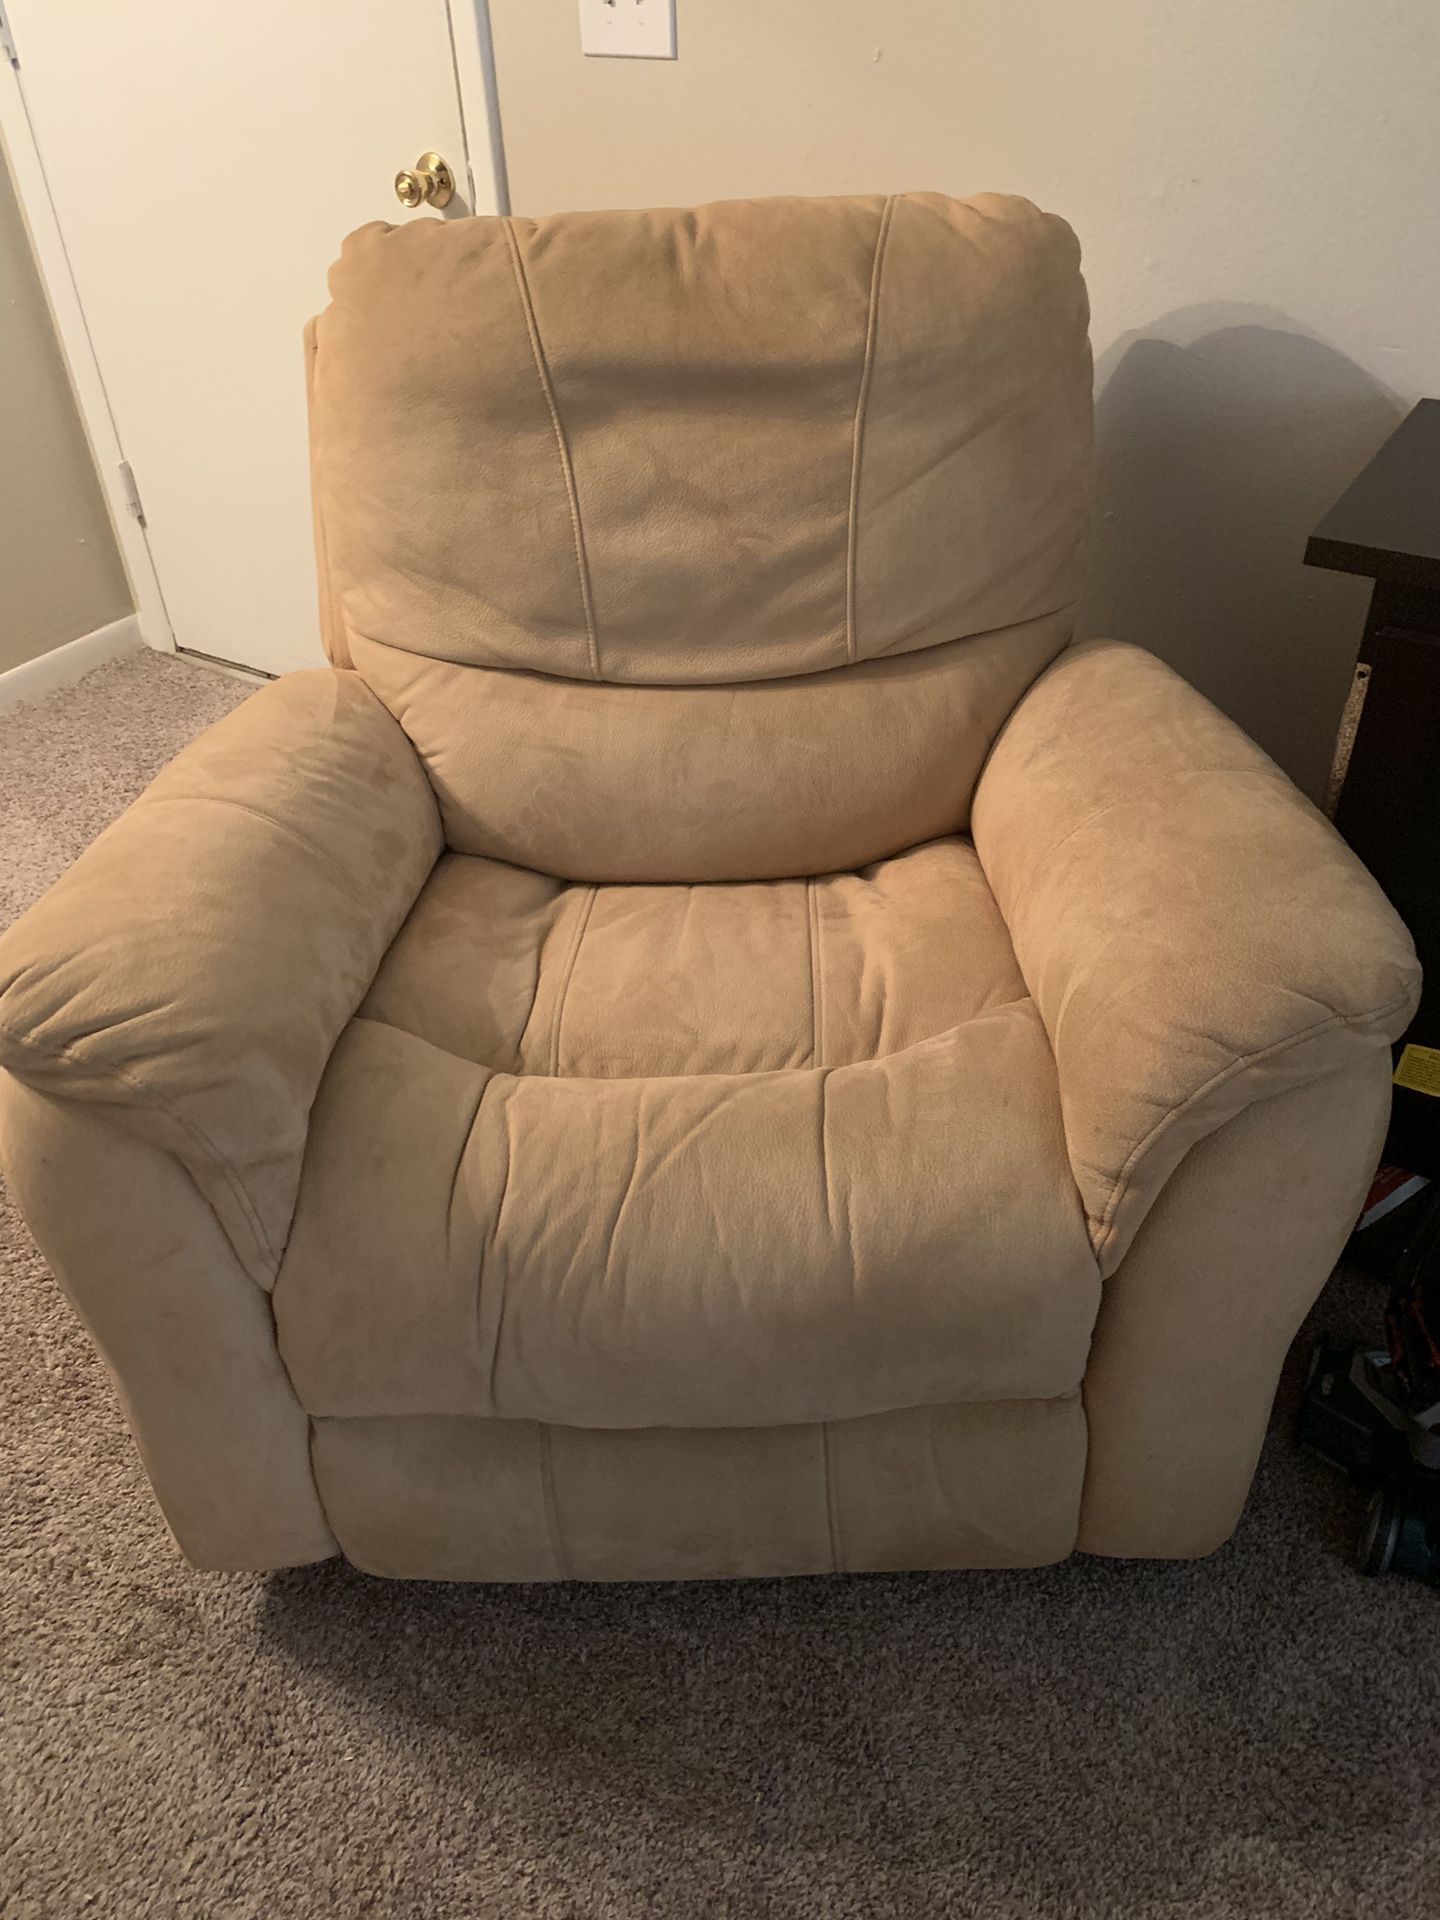 two recliners and couch